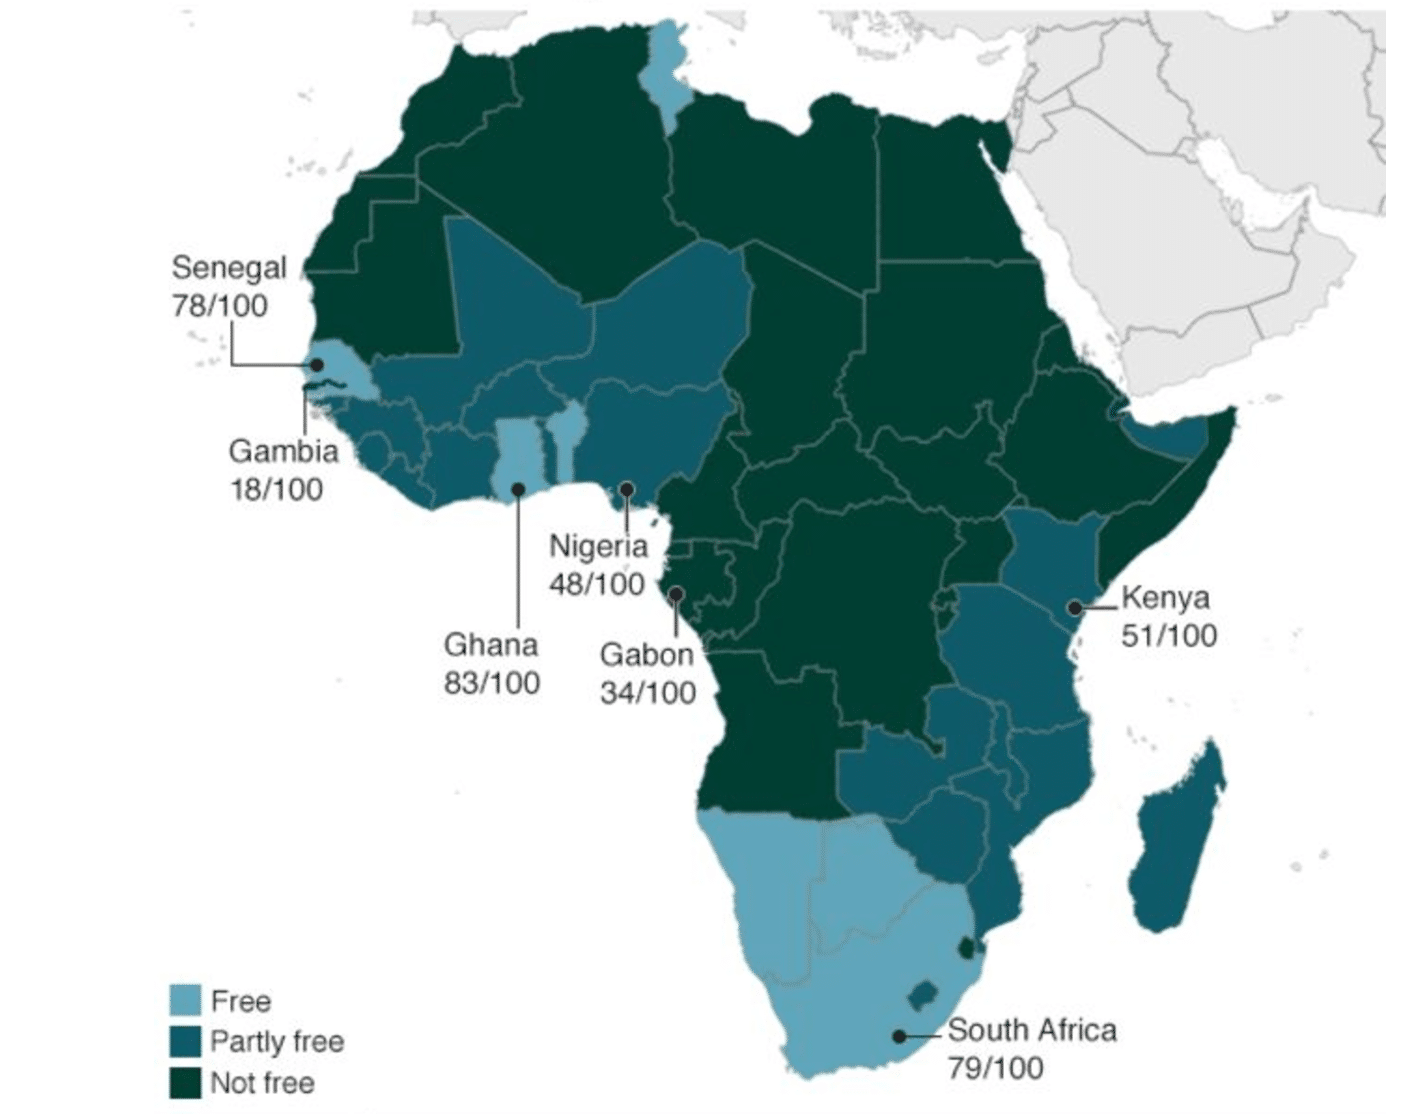 Free democratic countries in Africa